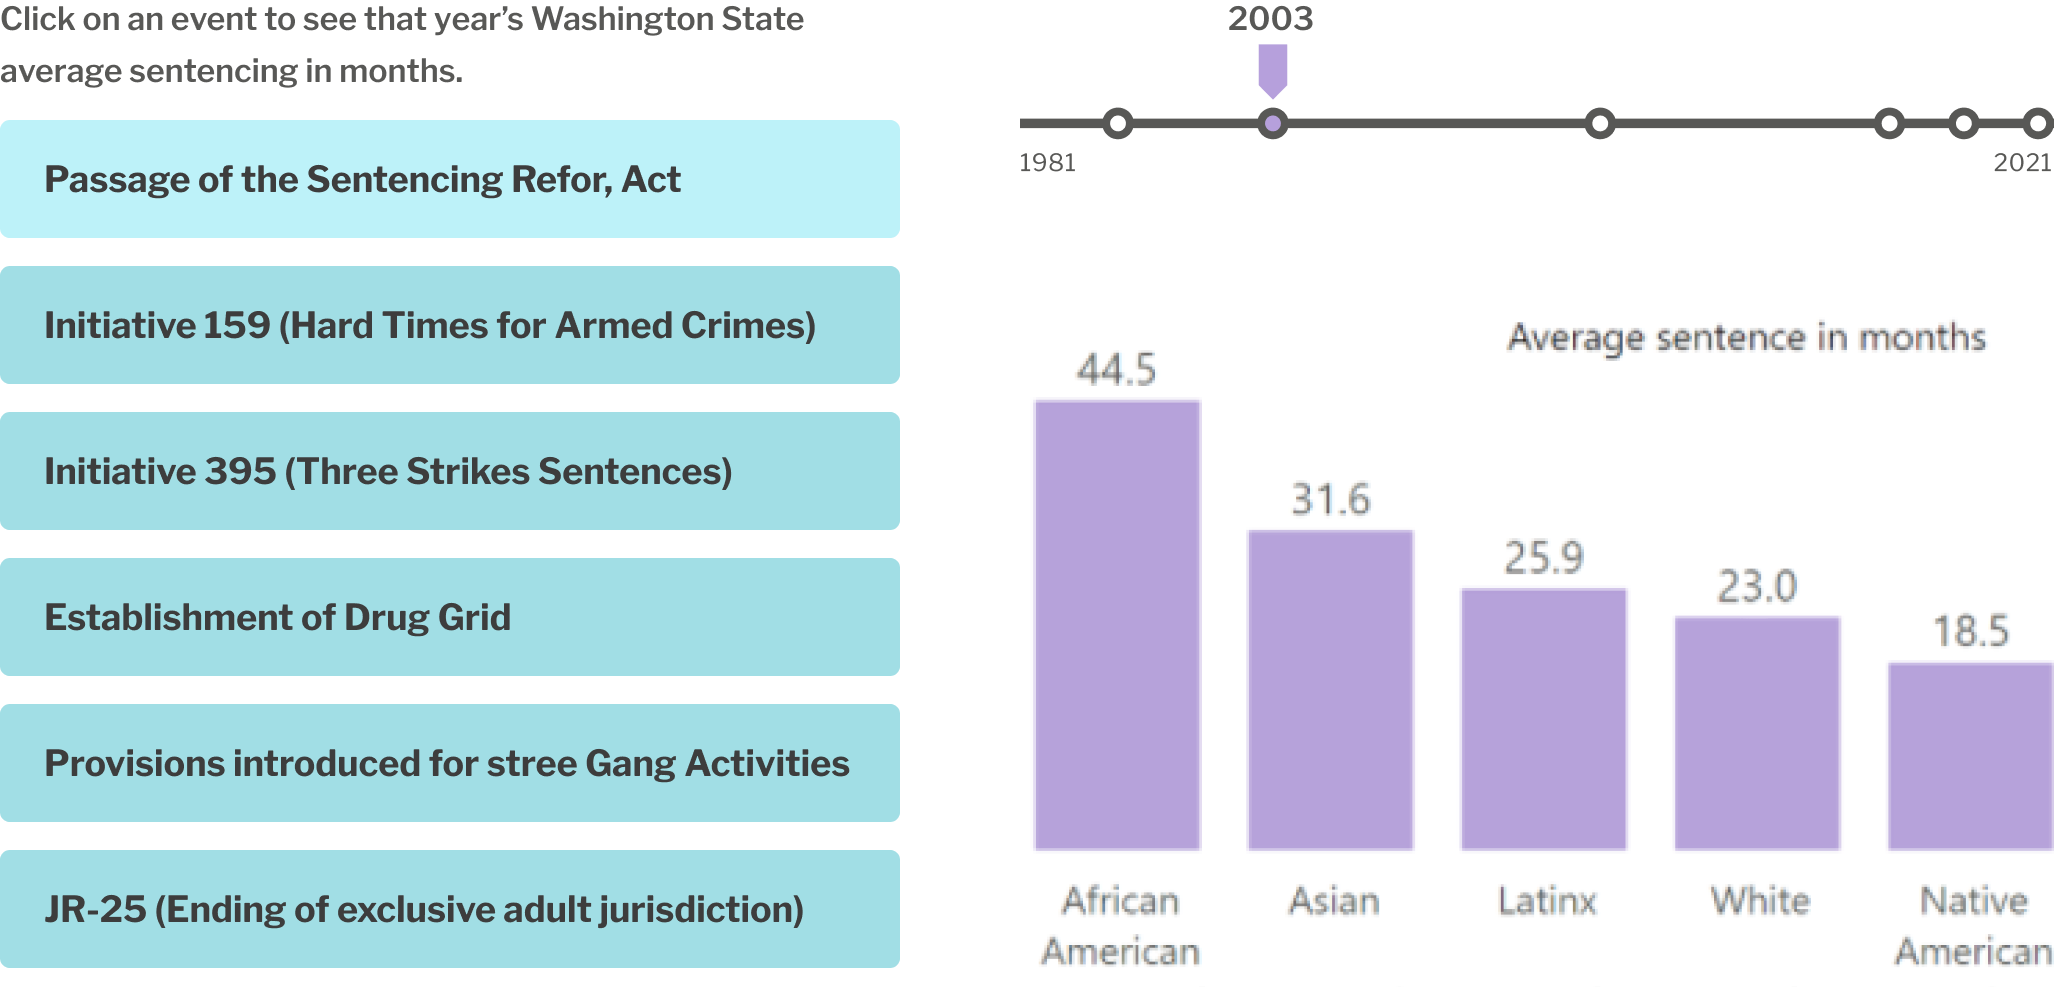 Click on an event to see that year’s Washington State average sentencing in months.